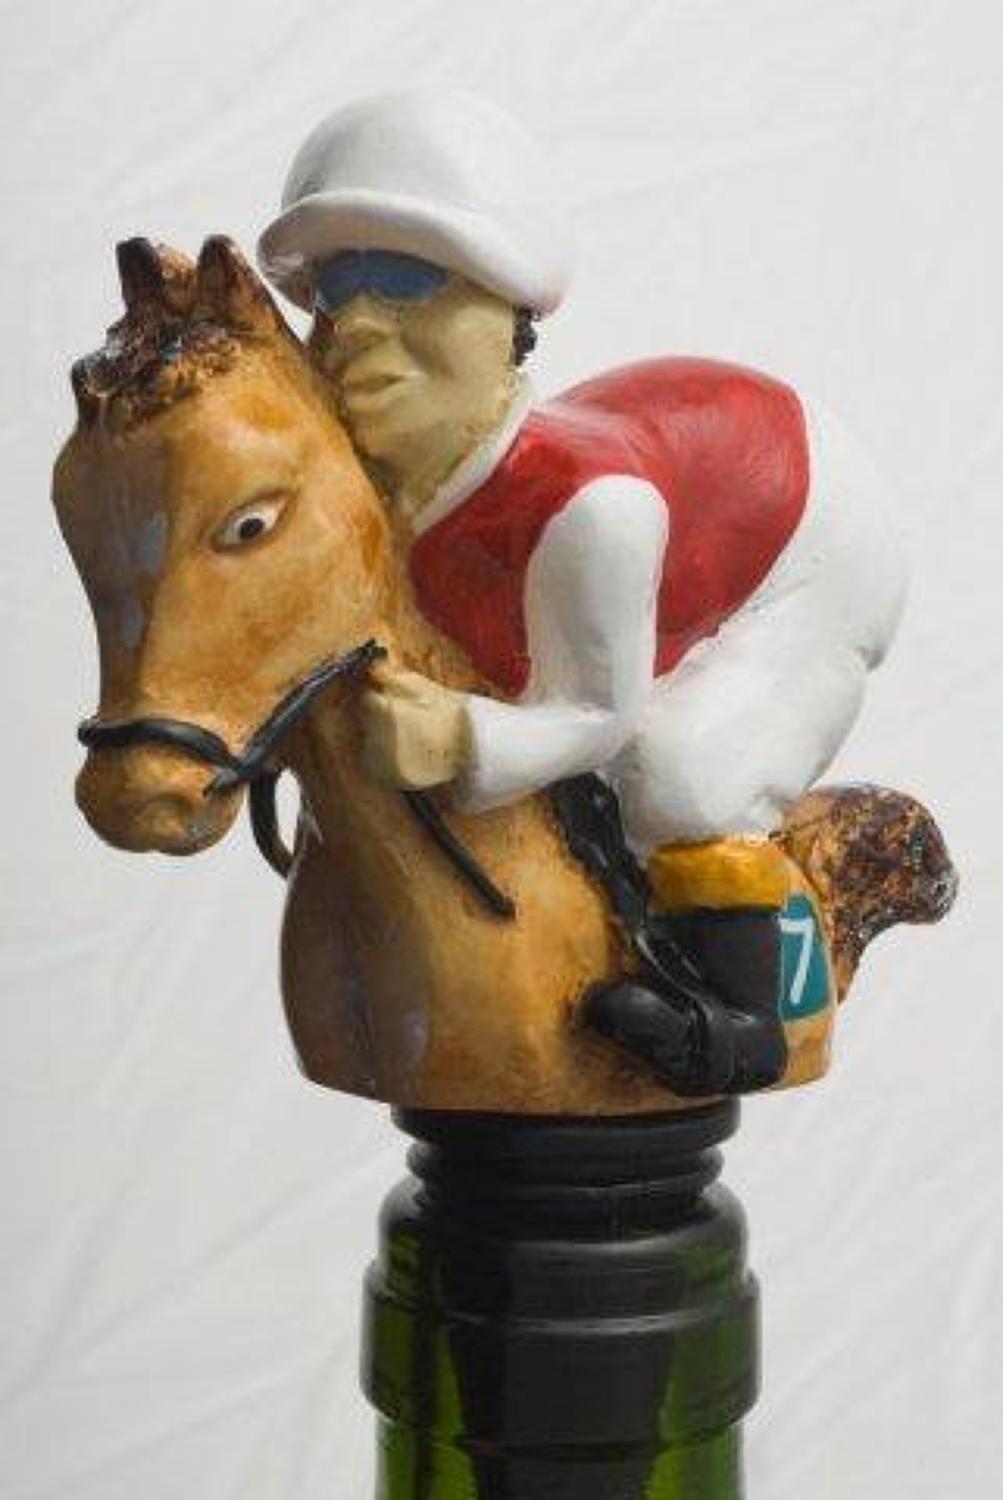 The Favourite horse racing bottle stopper